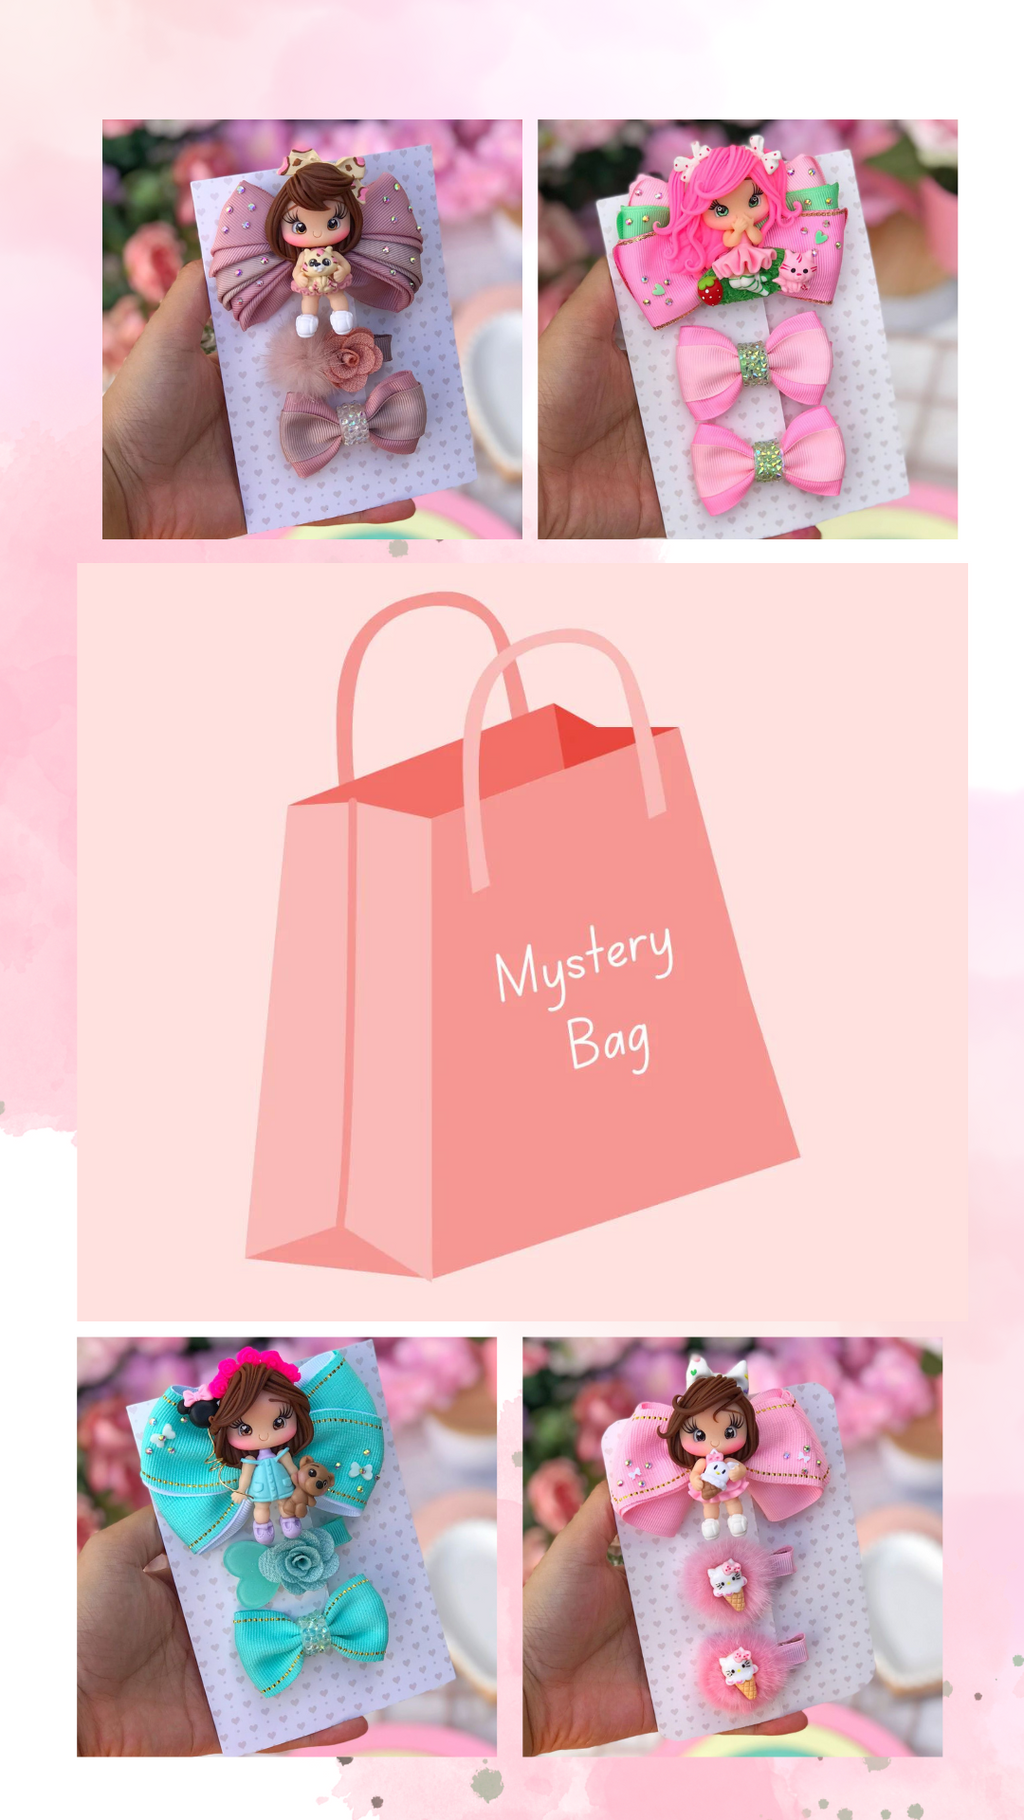 Hairbows Mystery bag - 3 piece set 🎀🎀🎀